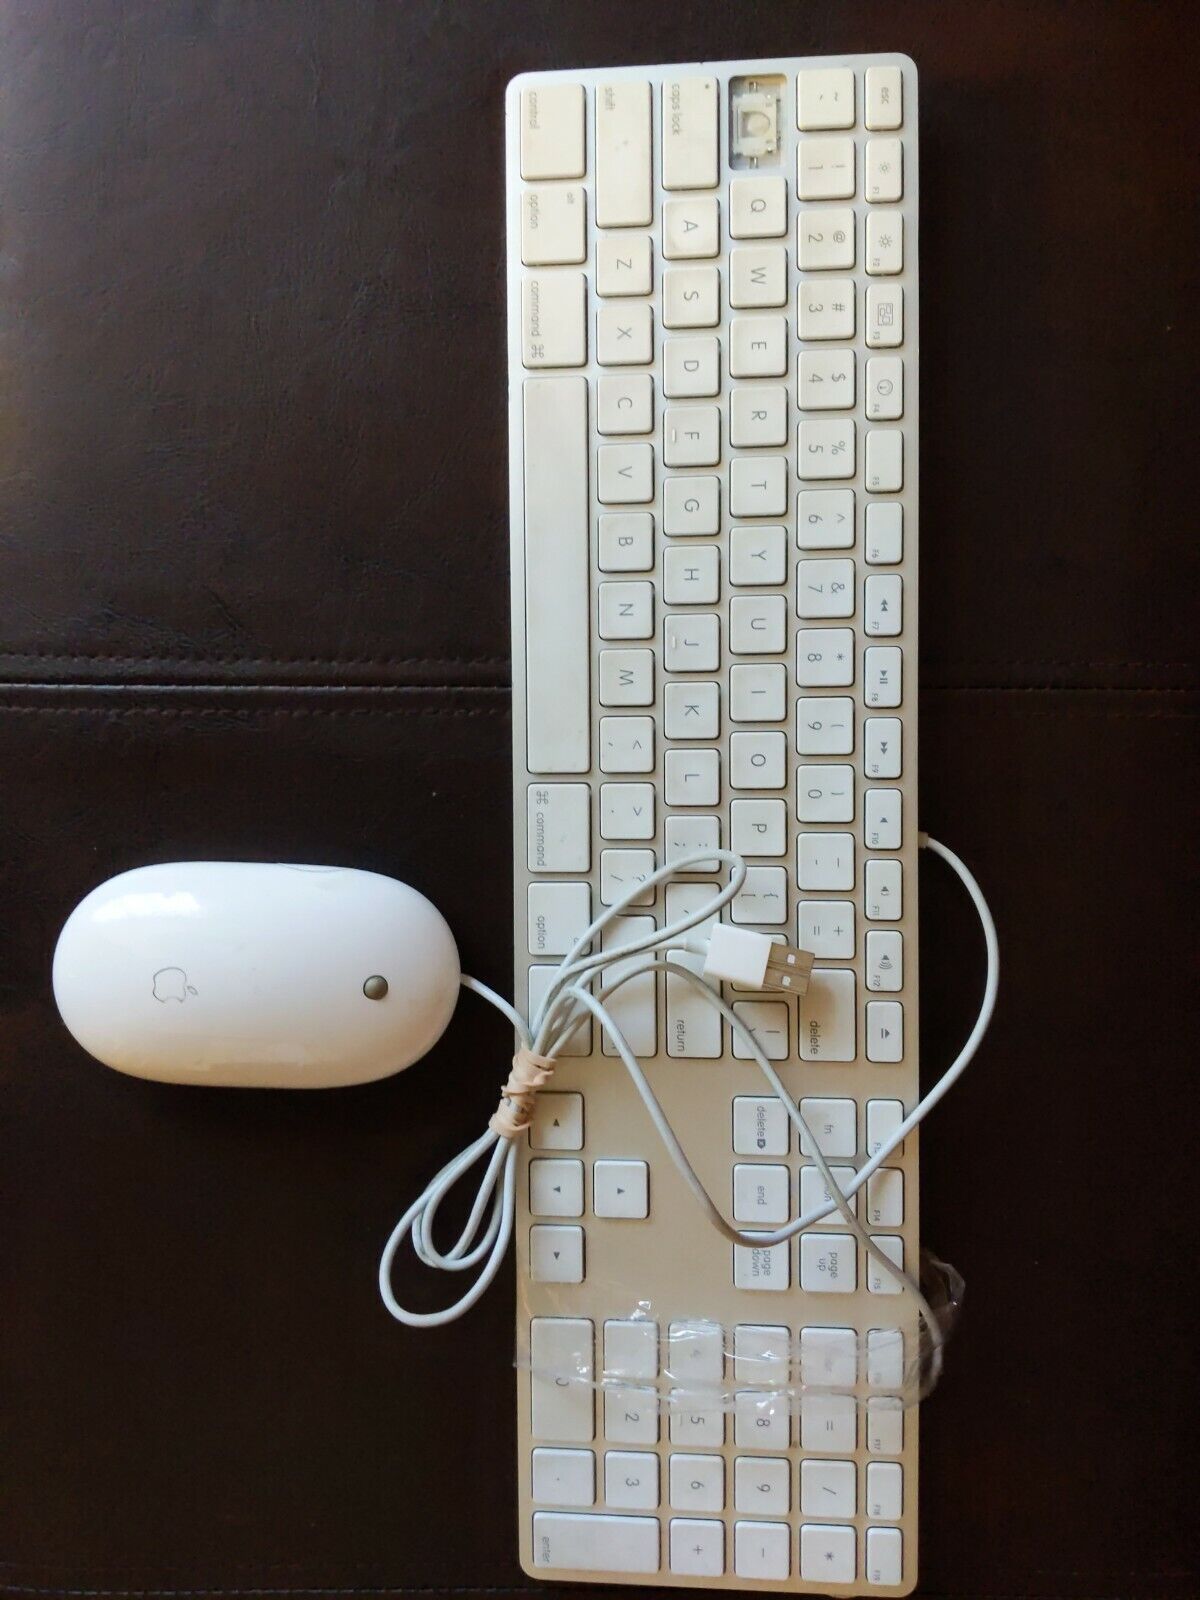 Apple White Aluminum USB Wired Keyboard Mighty Mouse -tab key missing.c3